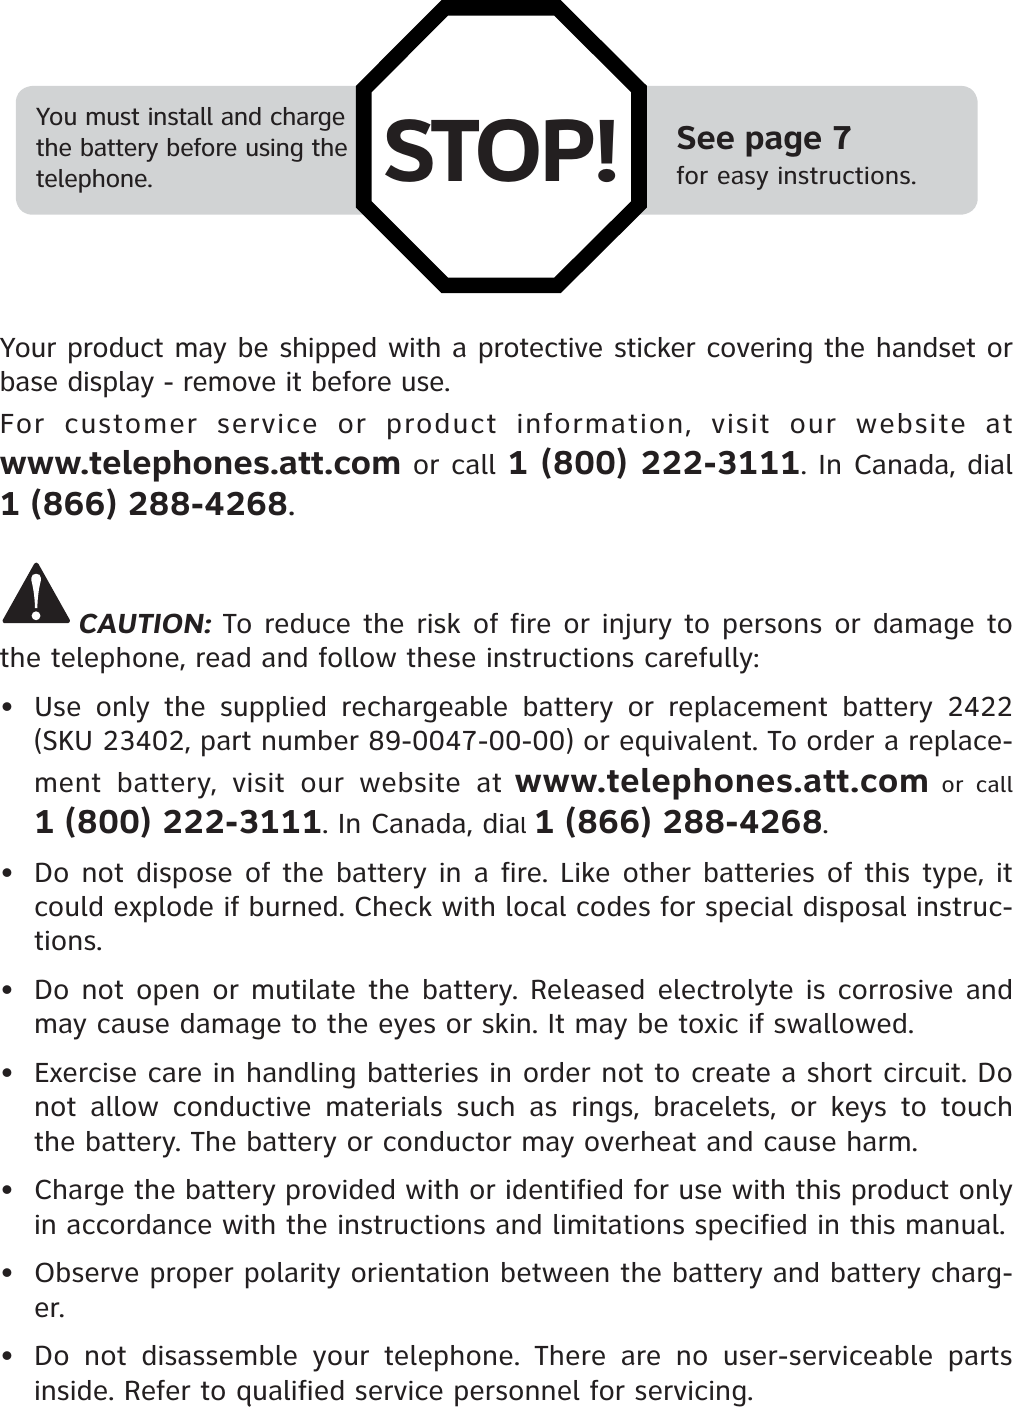 See page 7for easy instructions.You must install and charge the battery before using the telephone.Your product may be shipped with a protective sticker covering the handset or base display - remove it before use.For customer service or product information, visit our website atwww.telephones.att.com or call 1 (800) 222-3111. In Canada, dial 1 (866) 288-4268.CAUTION: To reduce the risk of fire or injury to persons or damage to the telephone, read and follow these instructions carefully:• Use only the supplied rechargeable battery or replacement battery 2422 (SKU 23402, part number 89-0047-00-00) or equivalent. To order a replace-ment battery, visit our website at www.telephones.att.com or call1 (800) 222-3111. In Canada, dial1 (866) 288-4268.• Do not dispose of the battery in a fire. Like other batteries of this type, it could explode if burned. Check with local codes for special disposal instruc-tions.• Do not open or mutilate the battery. Released electrolyte is corrosive and may cause damage to the eyes or skin. It may be toxic if swallowed.• Exercise care in handling batteries in order not to create a short circuit. Do not allow conductive materials such as rings, bracelets, or keys to touch the battery. The battery or conductor may overheat and cause harm.• Charge the battery provided with or identified for use with this product only in accordance with the instructions and limitations specified in this manual.• Observe proper polarity orientation between the battery and battery charg-er.• Do not disassemble your telephone. There are no user-serviceable parts inside. Refer to qualified service personnel for servicing.STOP!